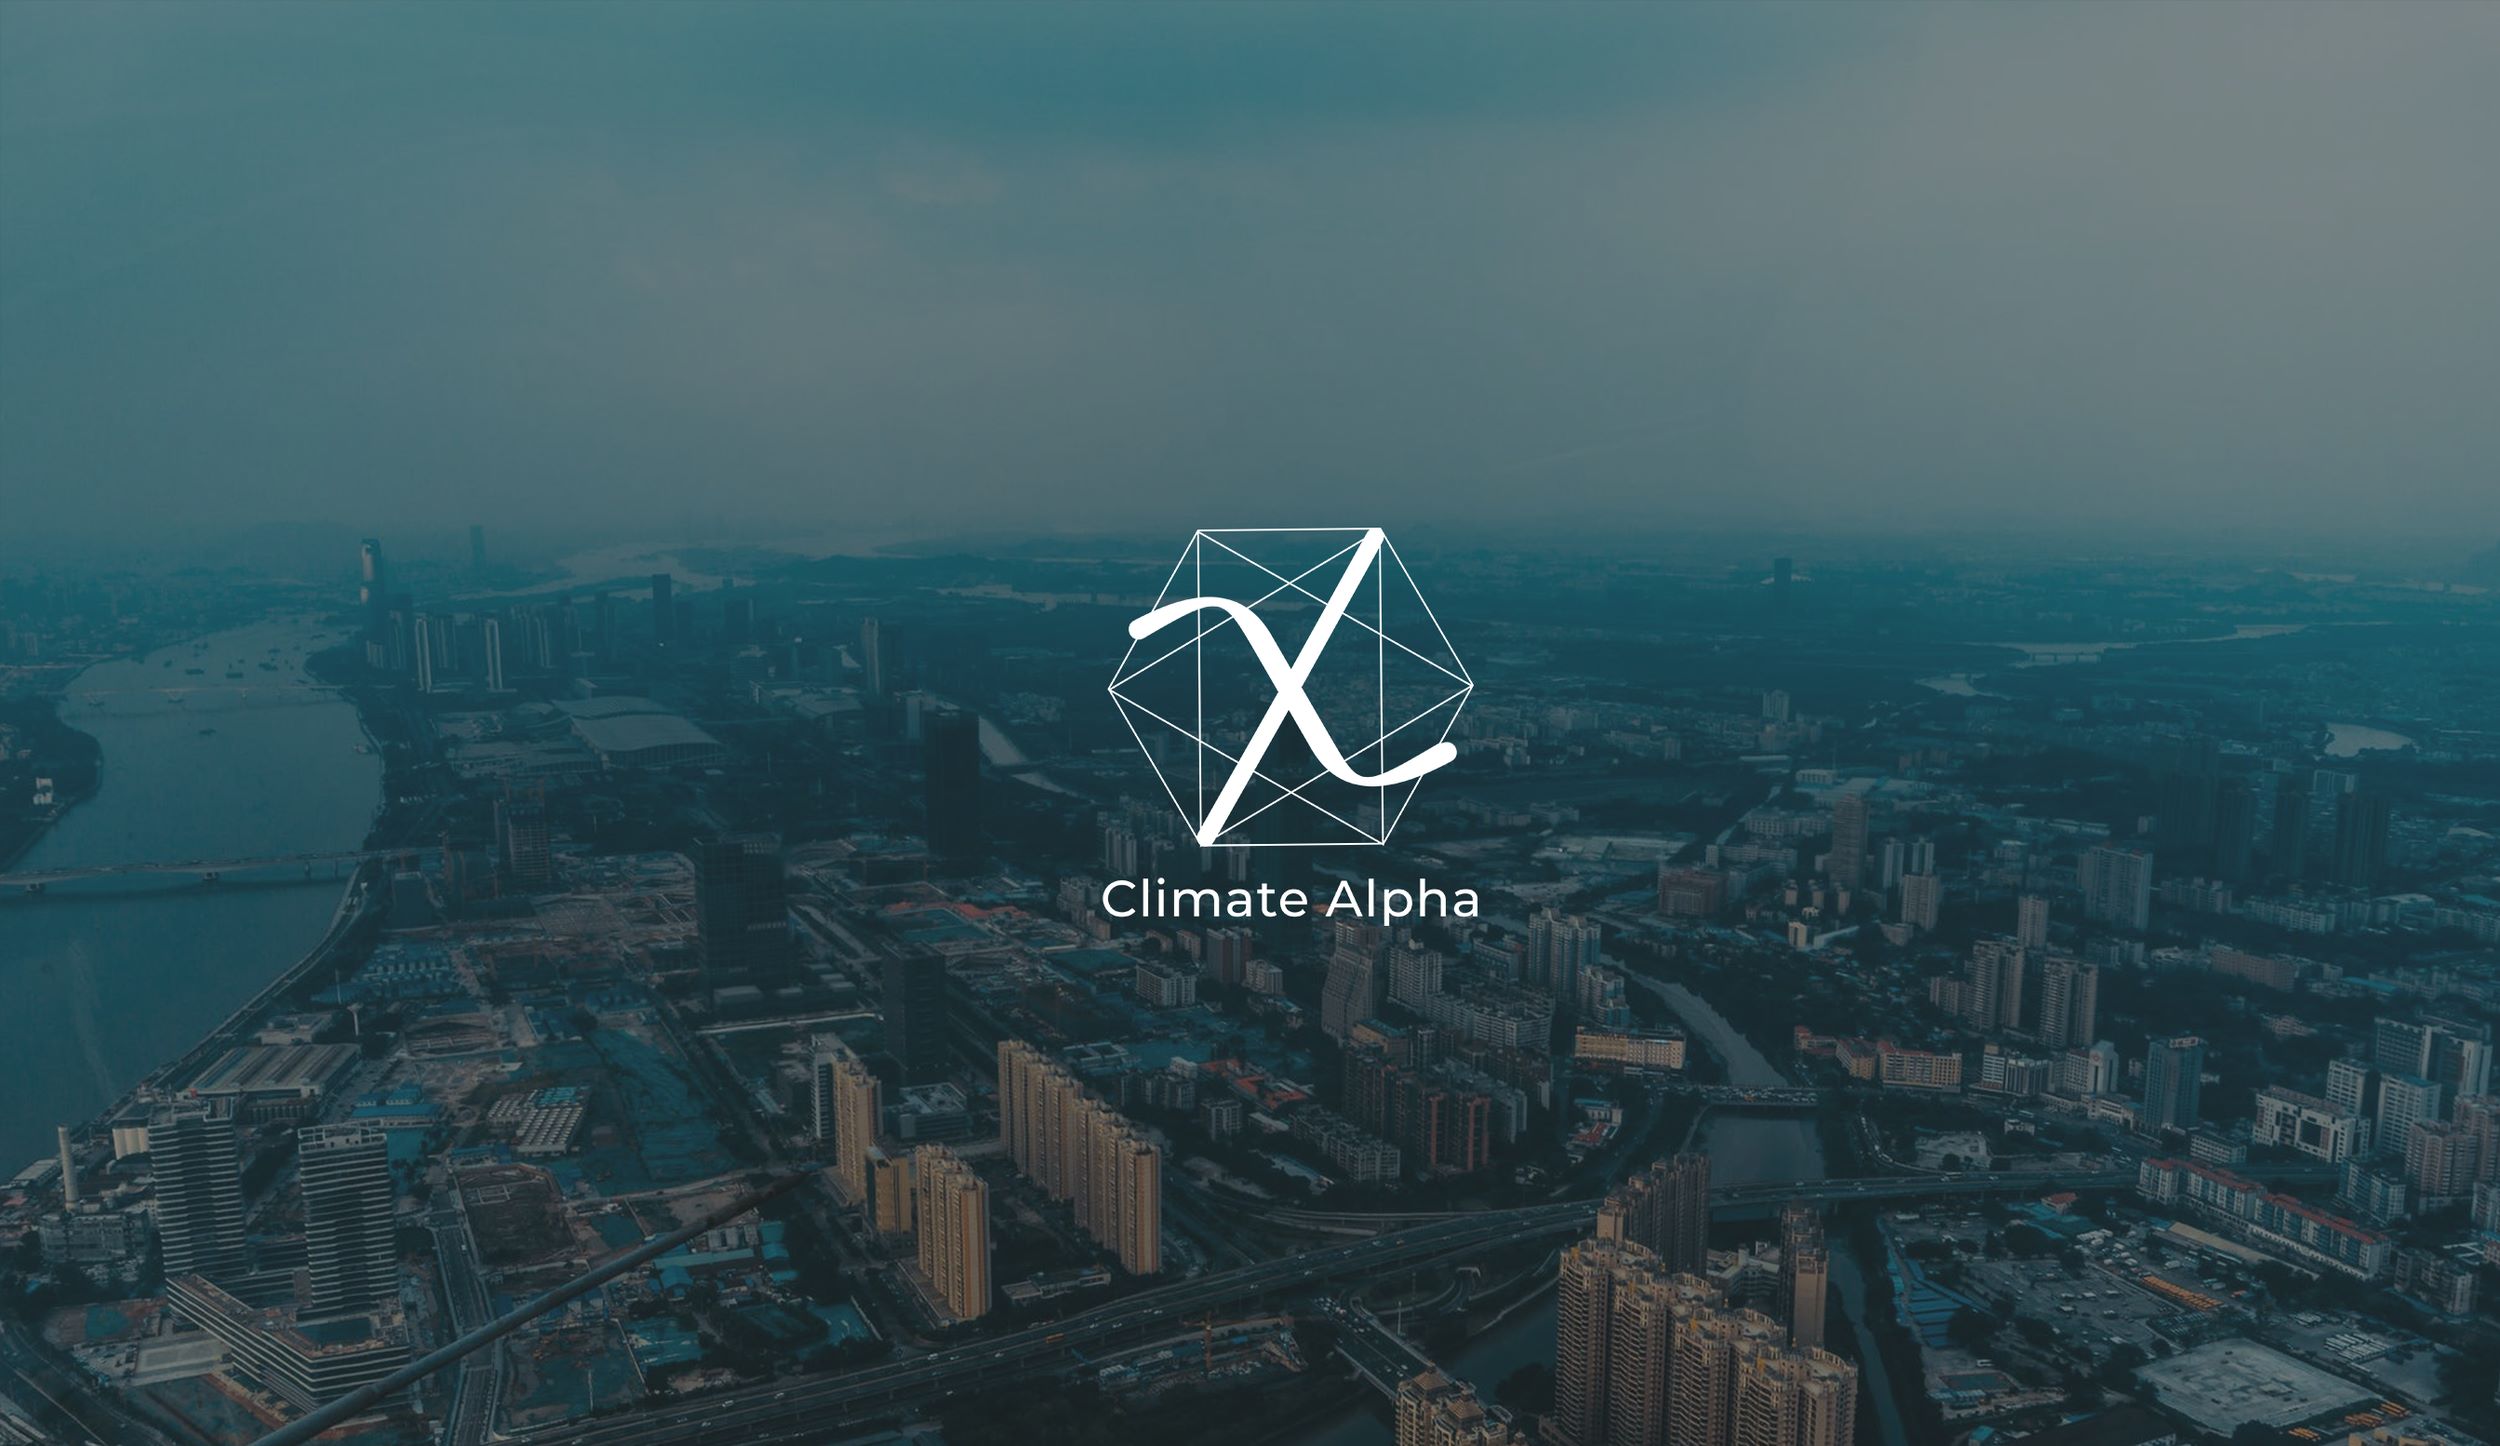 Singapore-based Climate Alpha Raises $5 Million In Seed Funding To Analyze Climate Change Impact On Real Estate